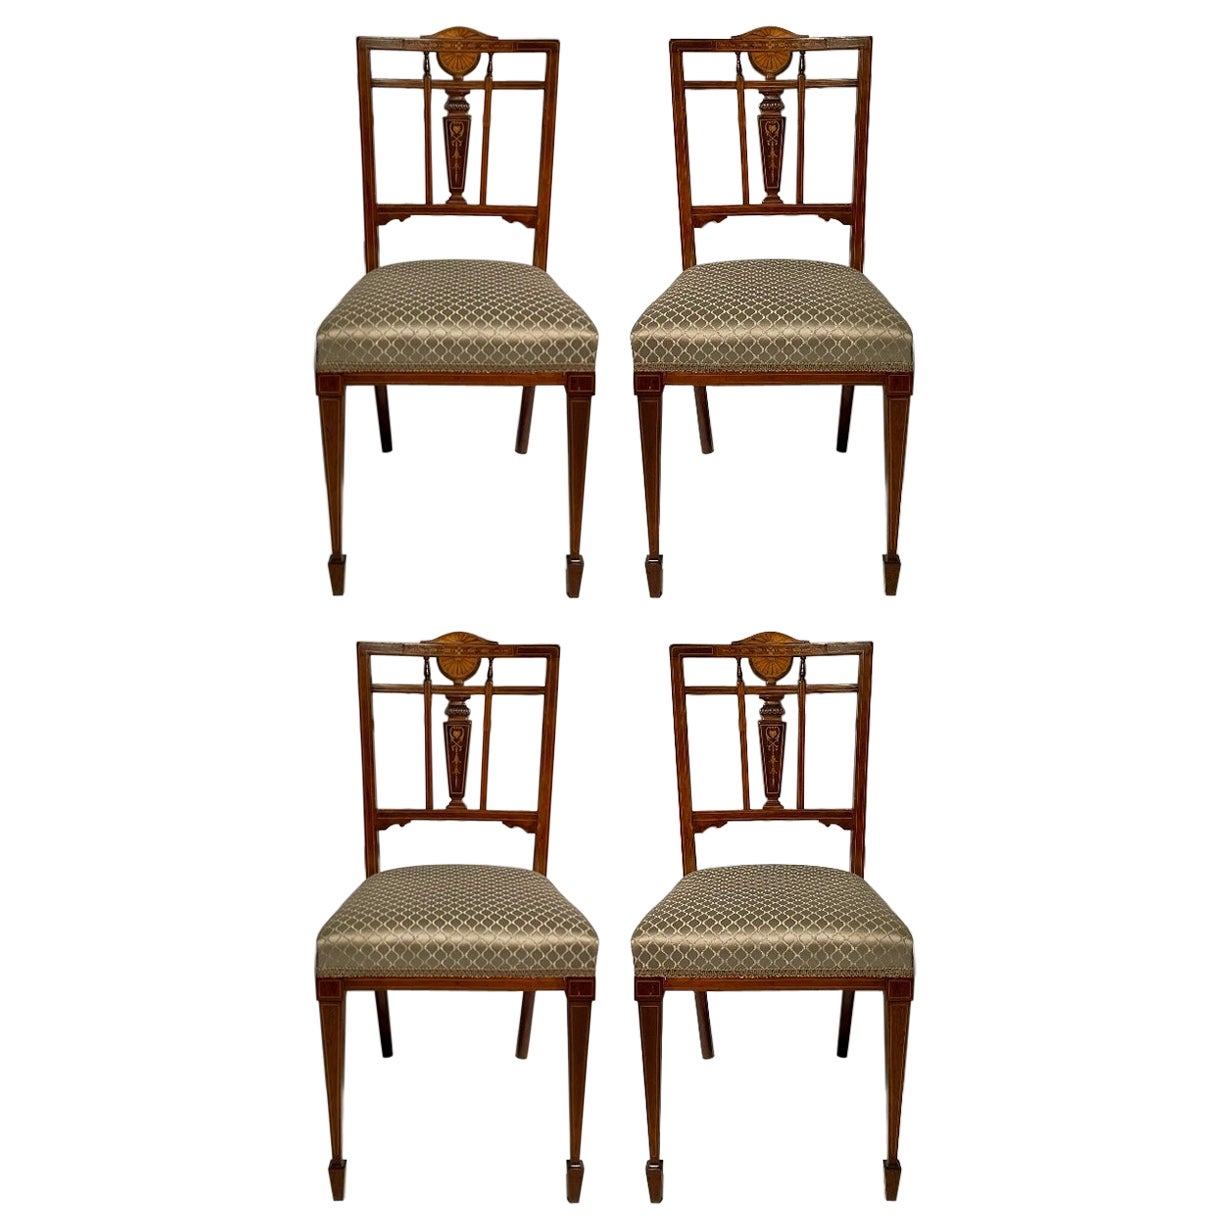 Set of 4 Antique English Rosewood Side Chairs, Circa 1880. For Sale